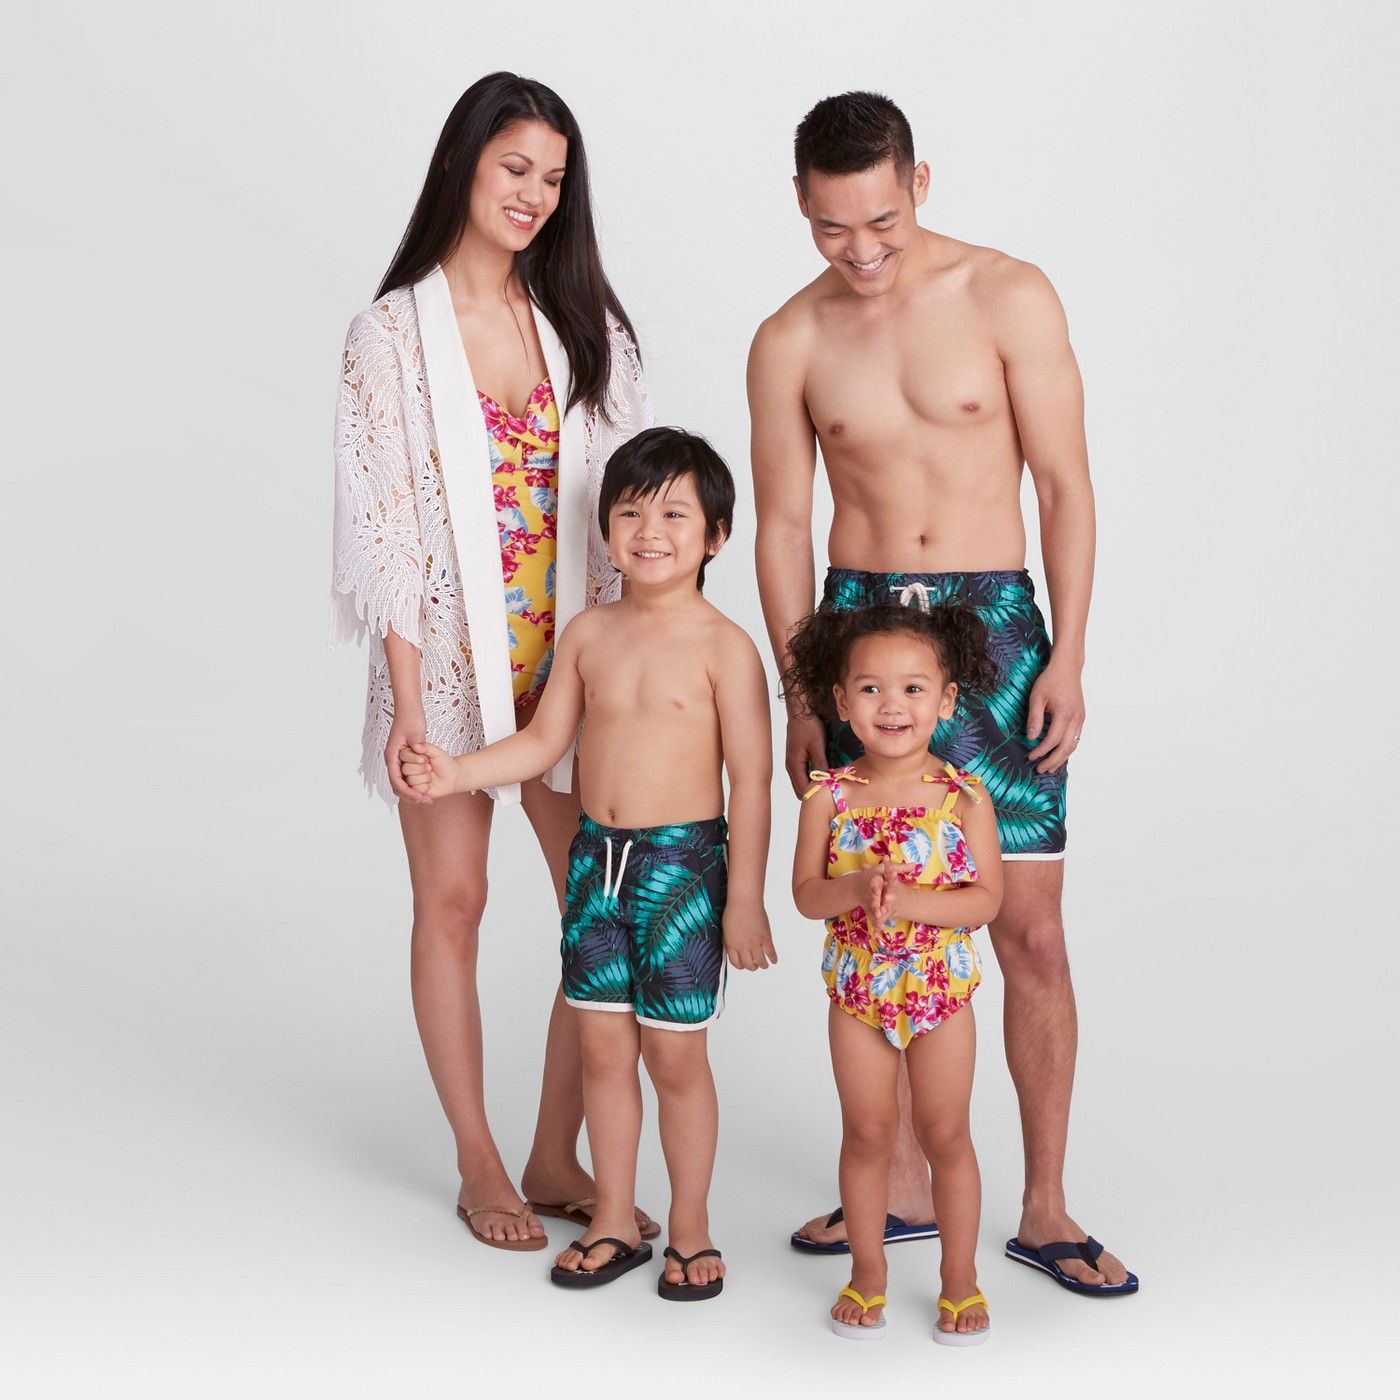 Target is selling matching family swimsuits—So you can be the most